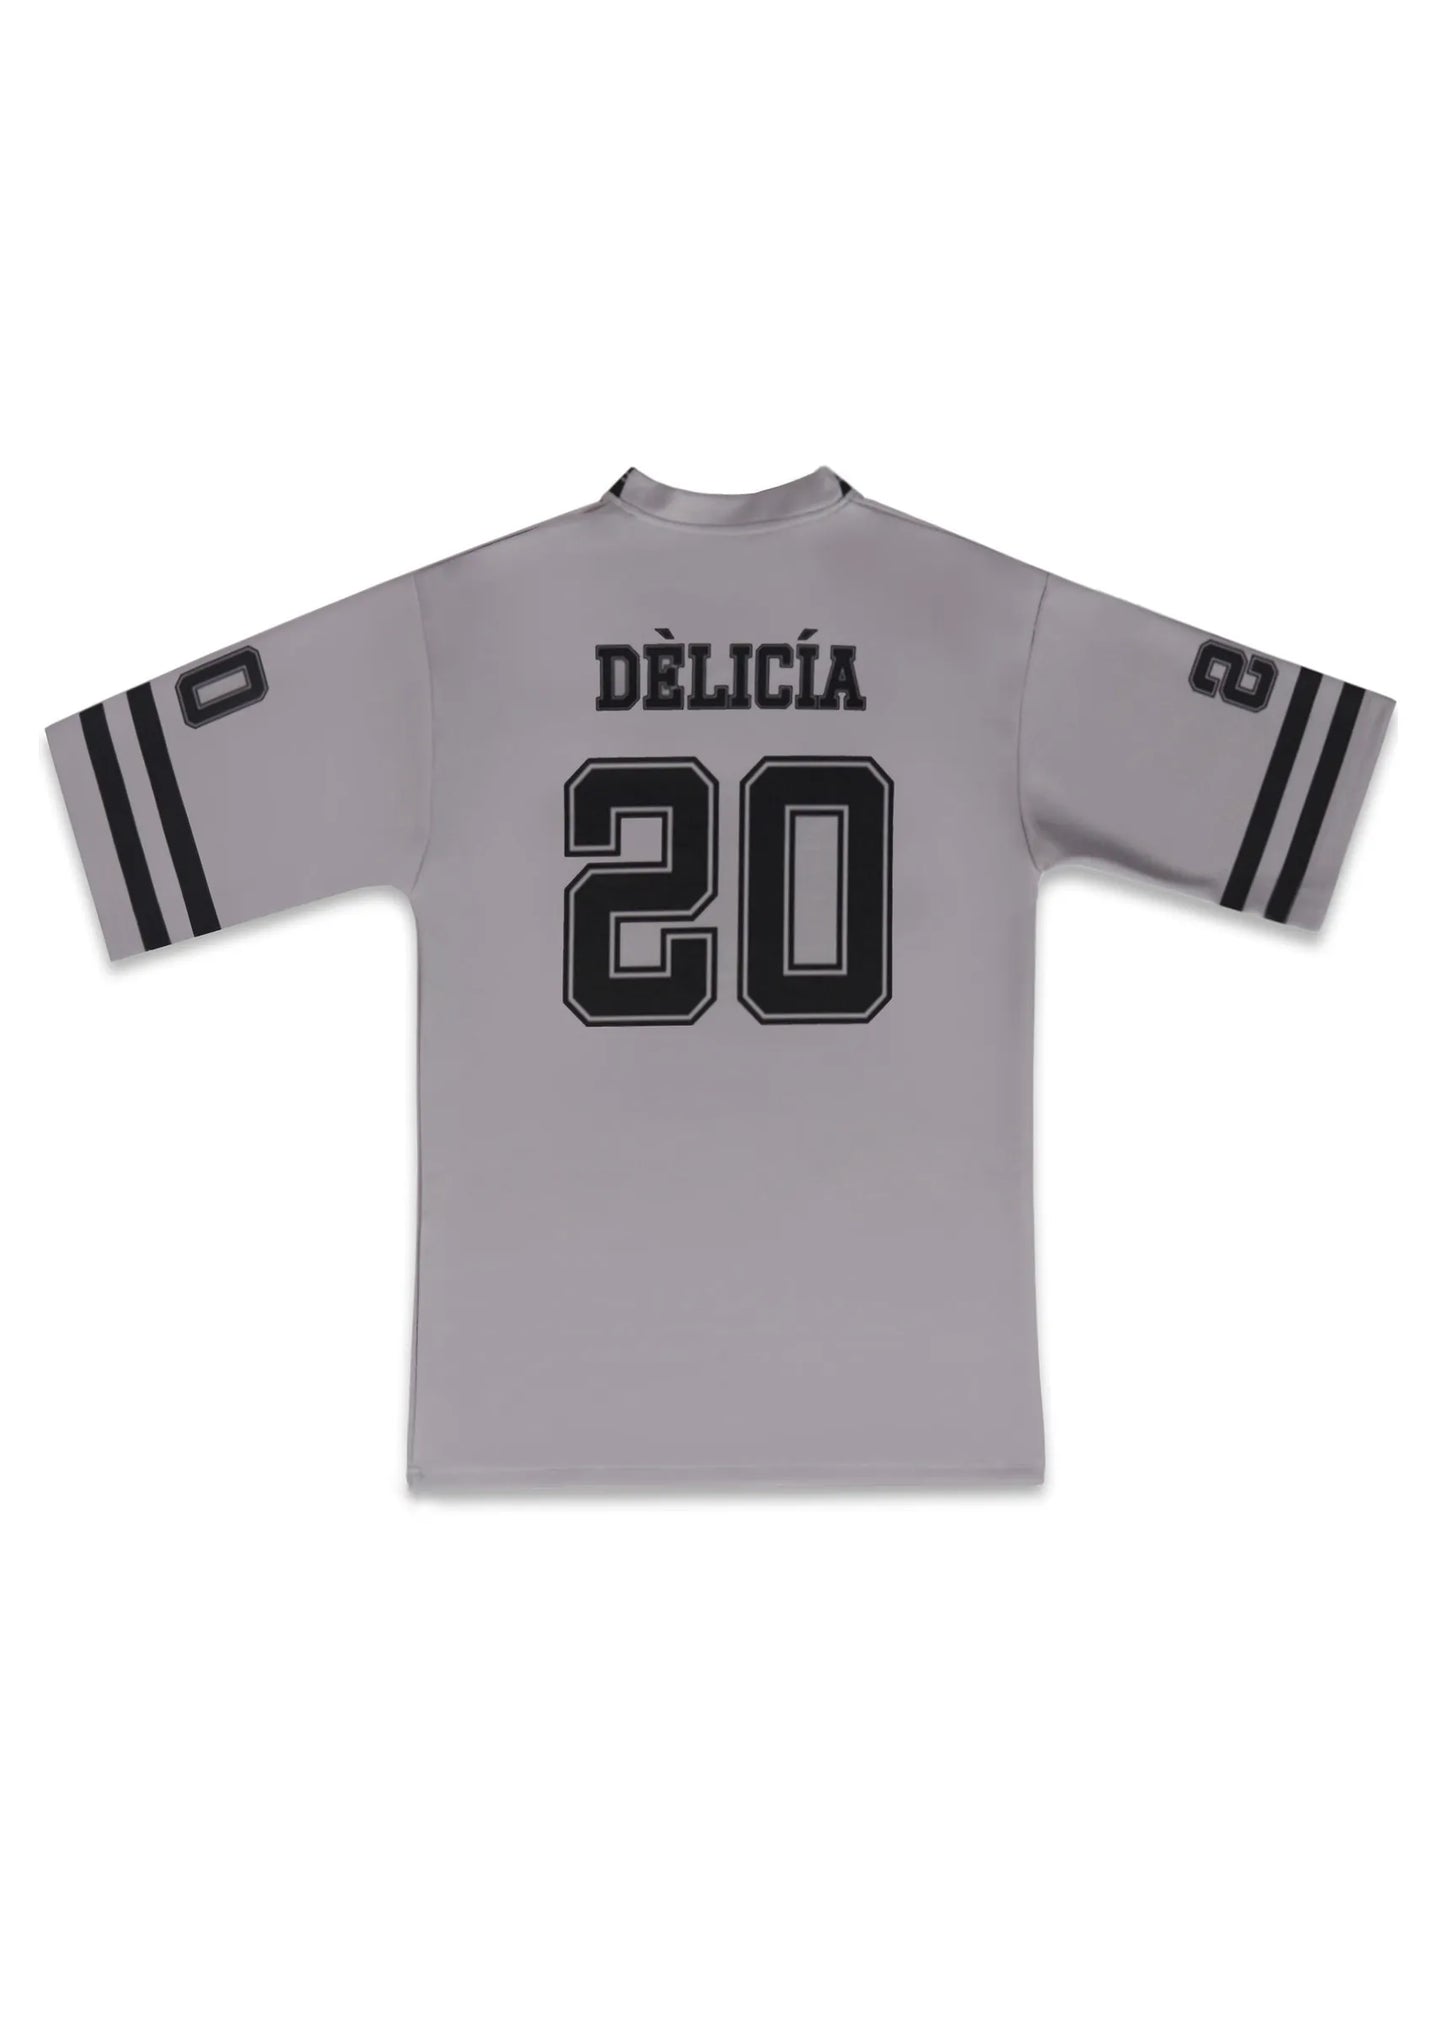 Jersey "20" Edition in Grey